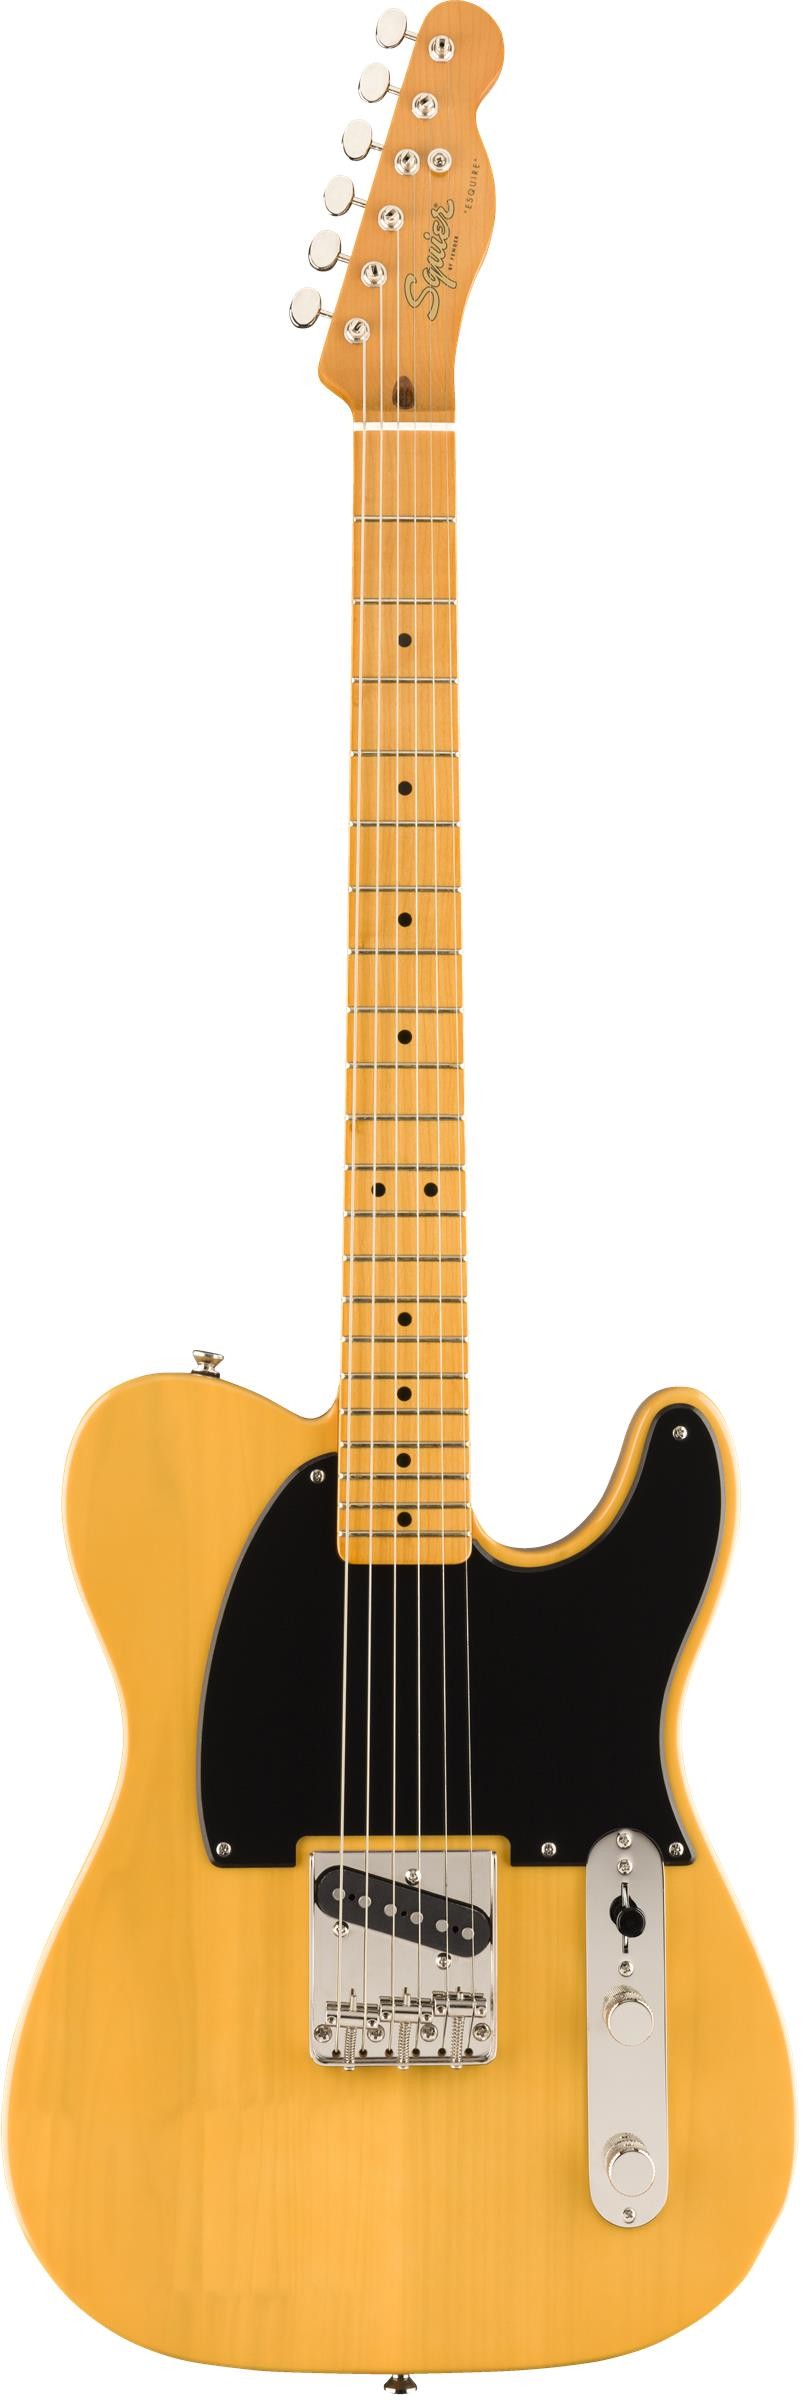 Squier Classic Vibe 50s ESQUIRE Butterscotch Blonde Limited Edition